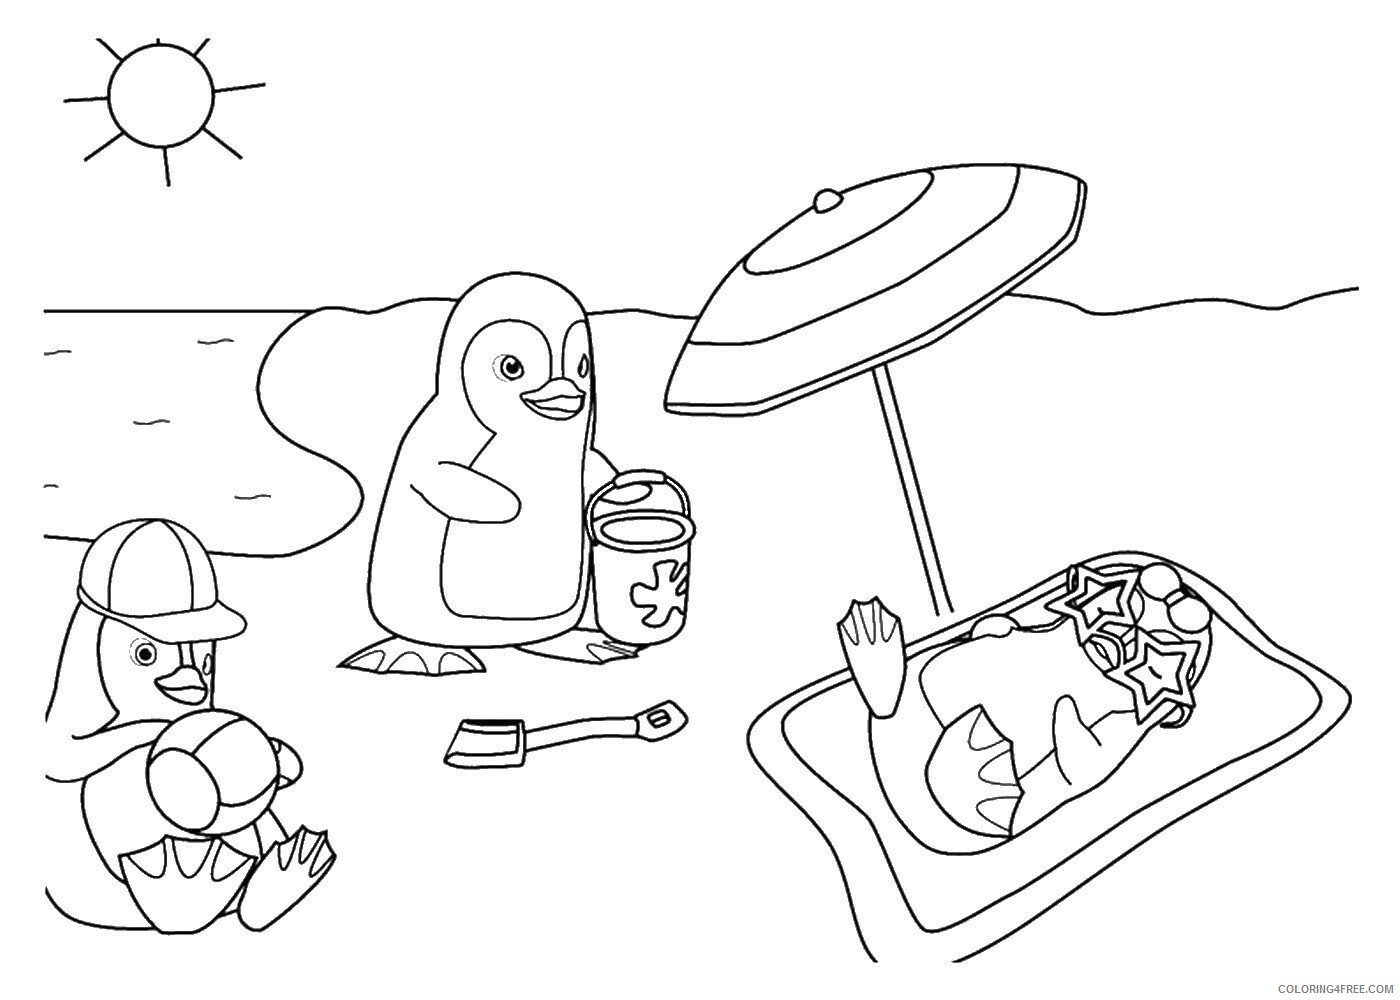 Ozie Boo Coloring Pages TV Film Ozie_Boo_cl_14 Printable 2020 05866 Coloring4free